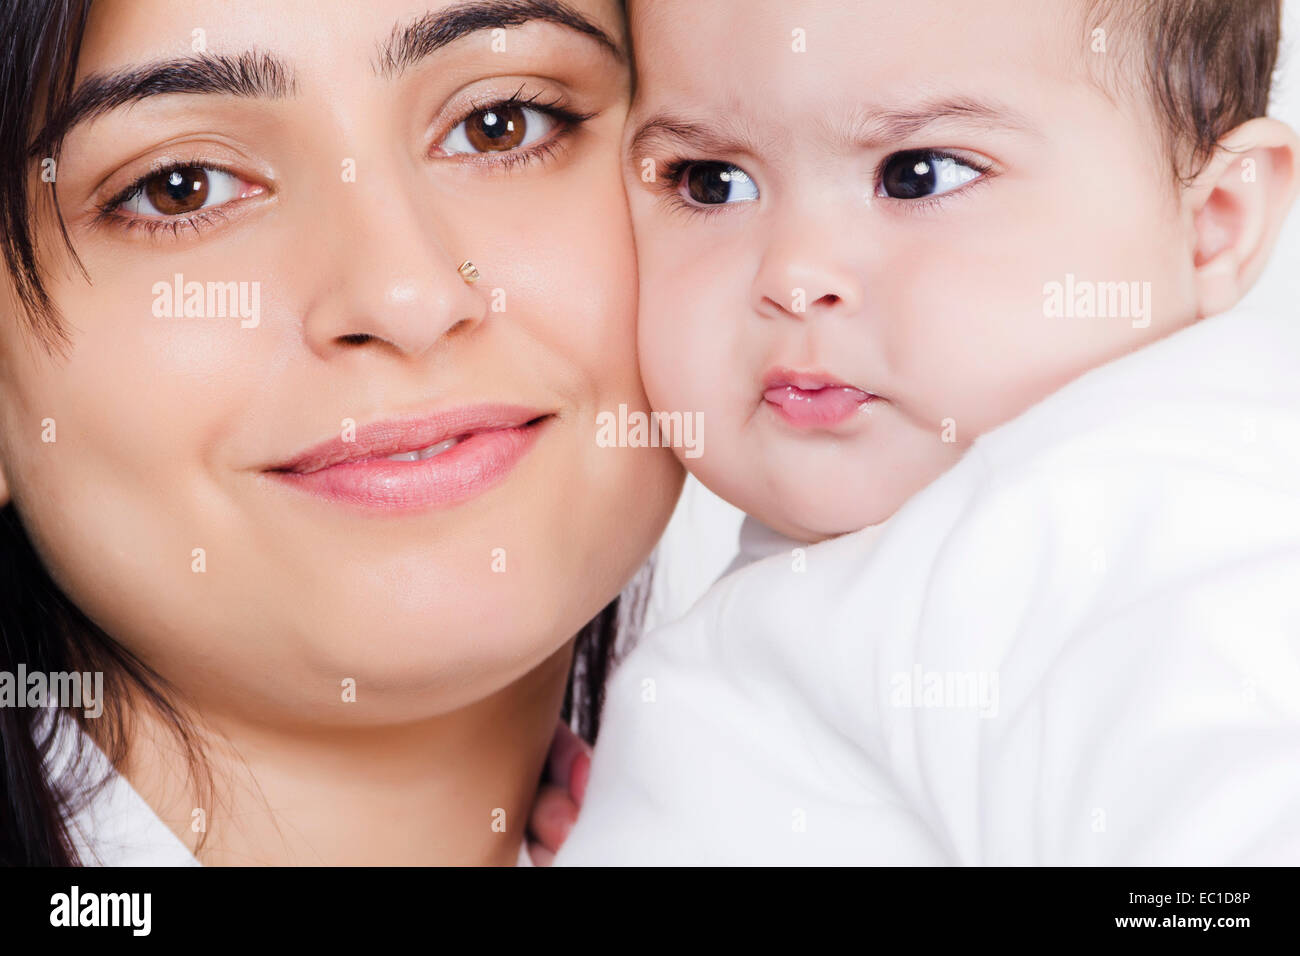 Indian Mother Caring his Baby Stock Photo